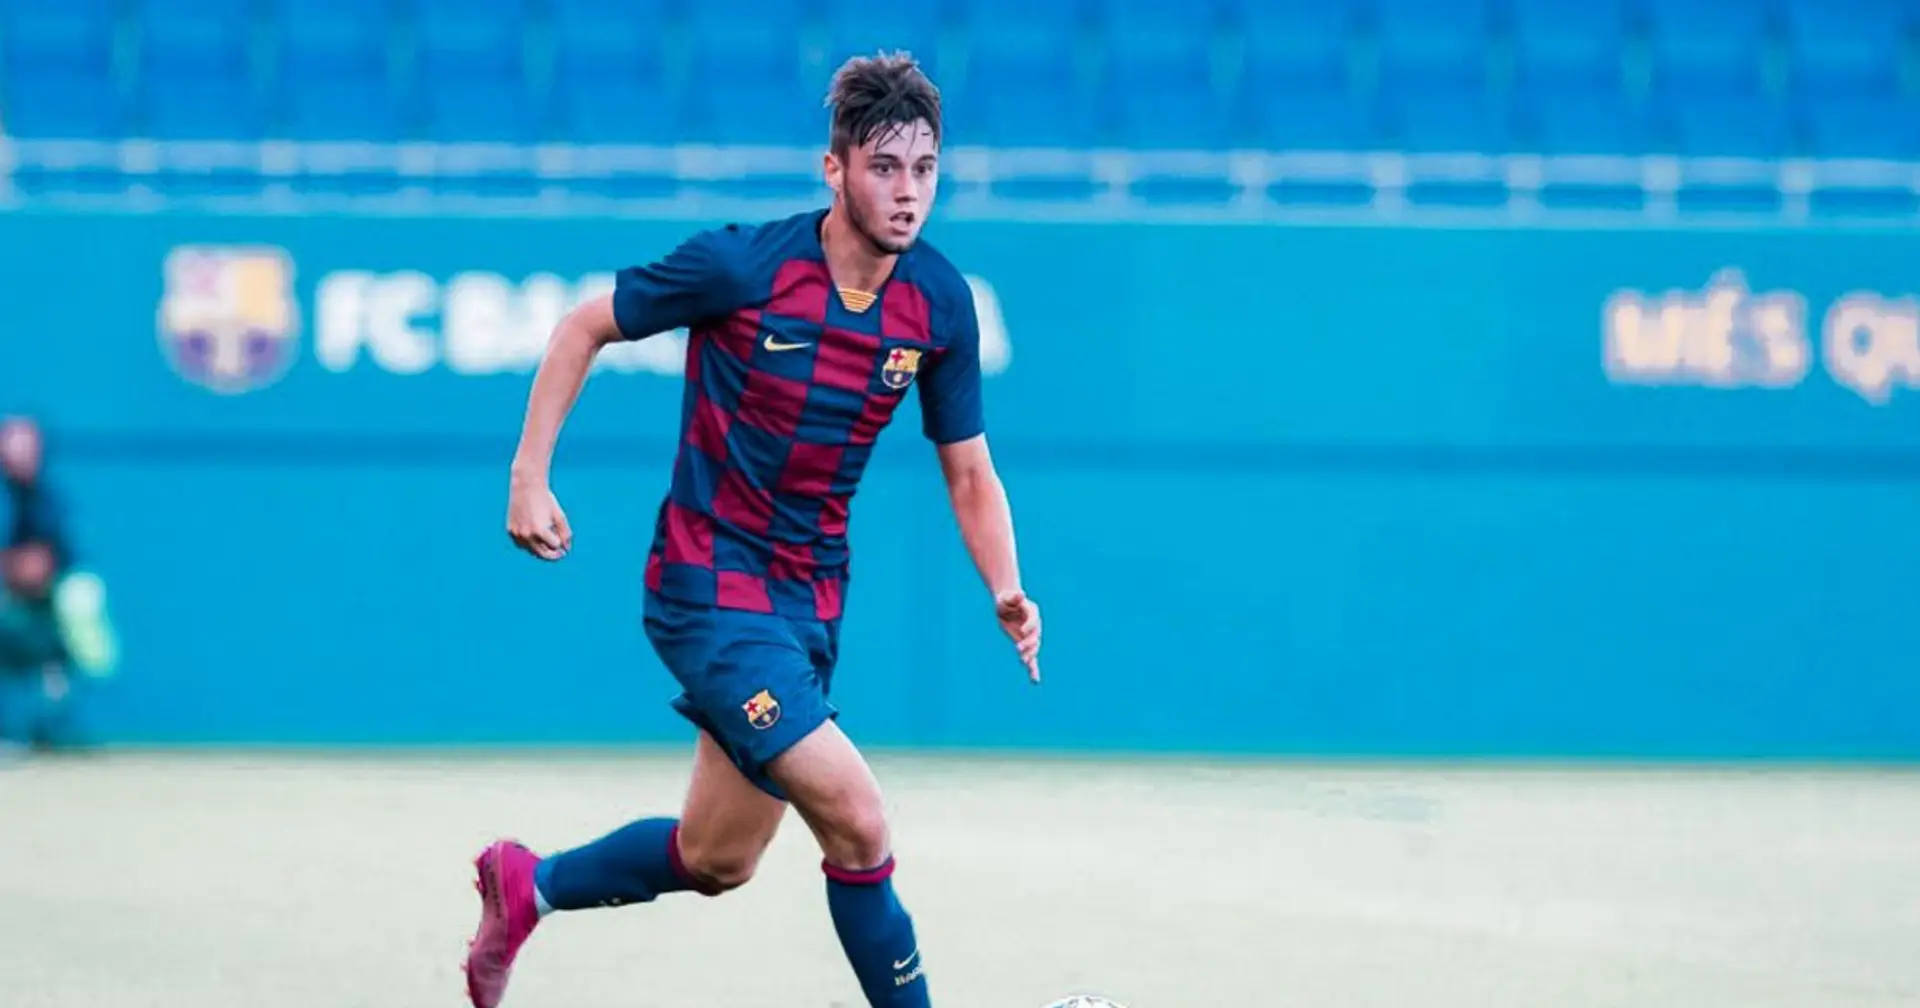 Barcelona highly-rated Academy forward Jaume Jardi to join Real Madrid (reliability: 4 stars)